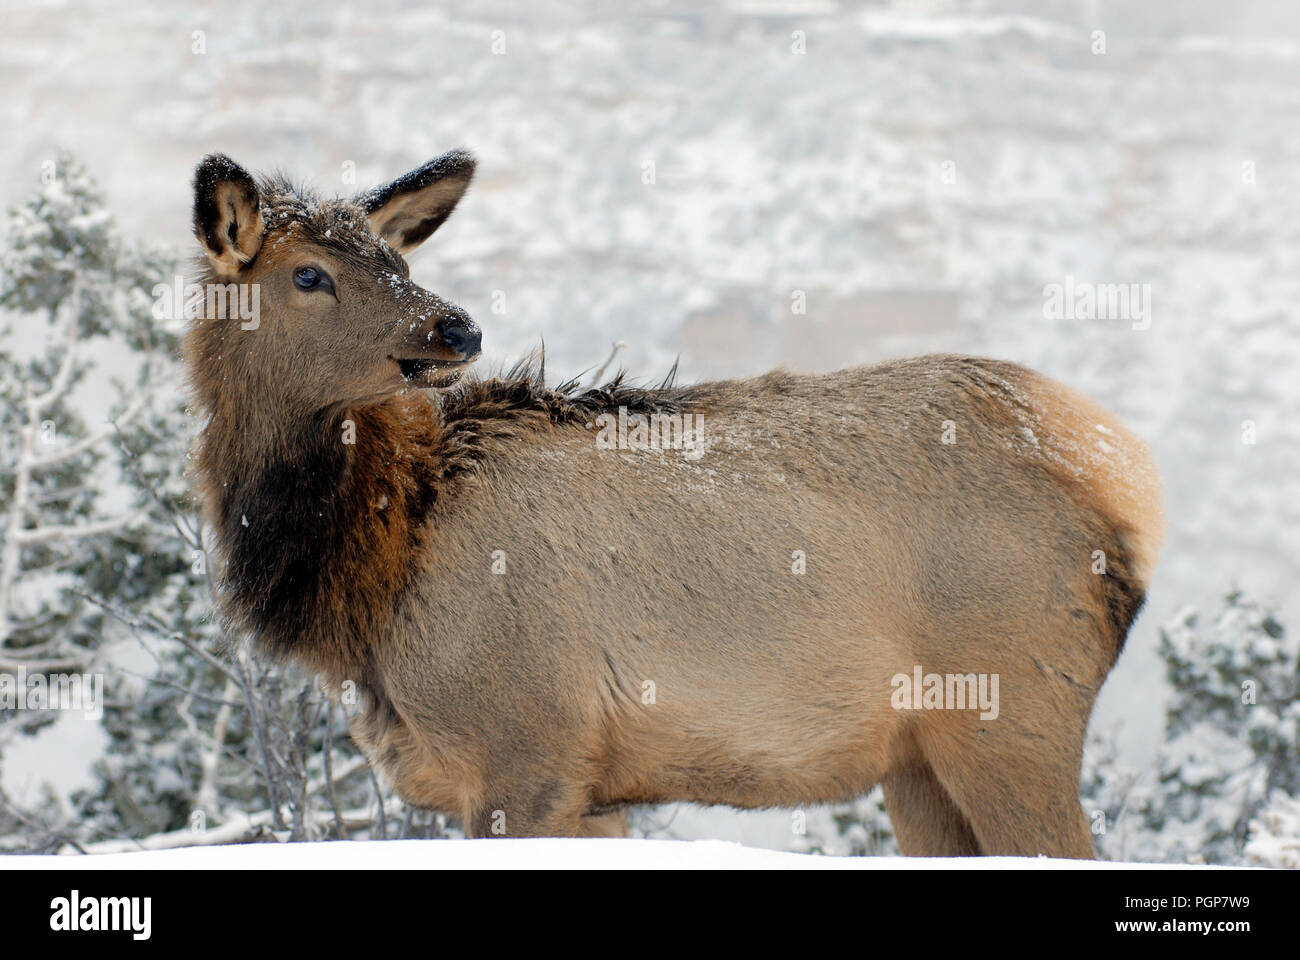 Winter scene showing an elk in the snow at the South Rim of Grand Canyon National Park in Arizona. The large animals are frequently seen by visitors. Stock Photo